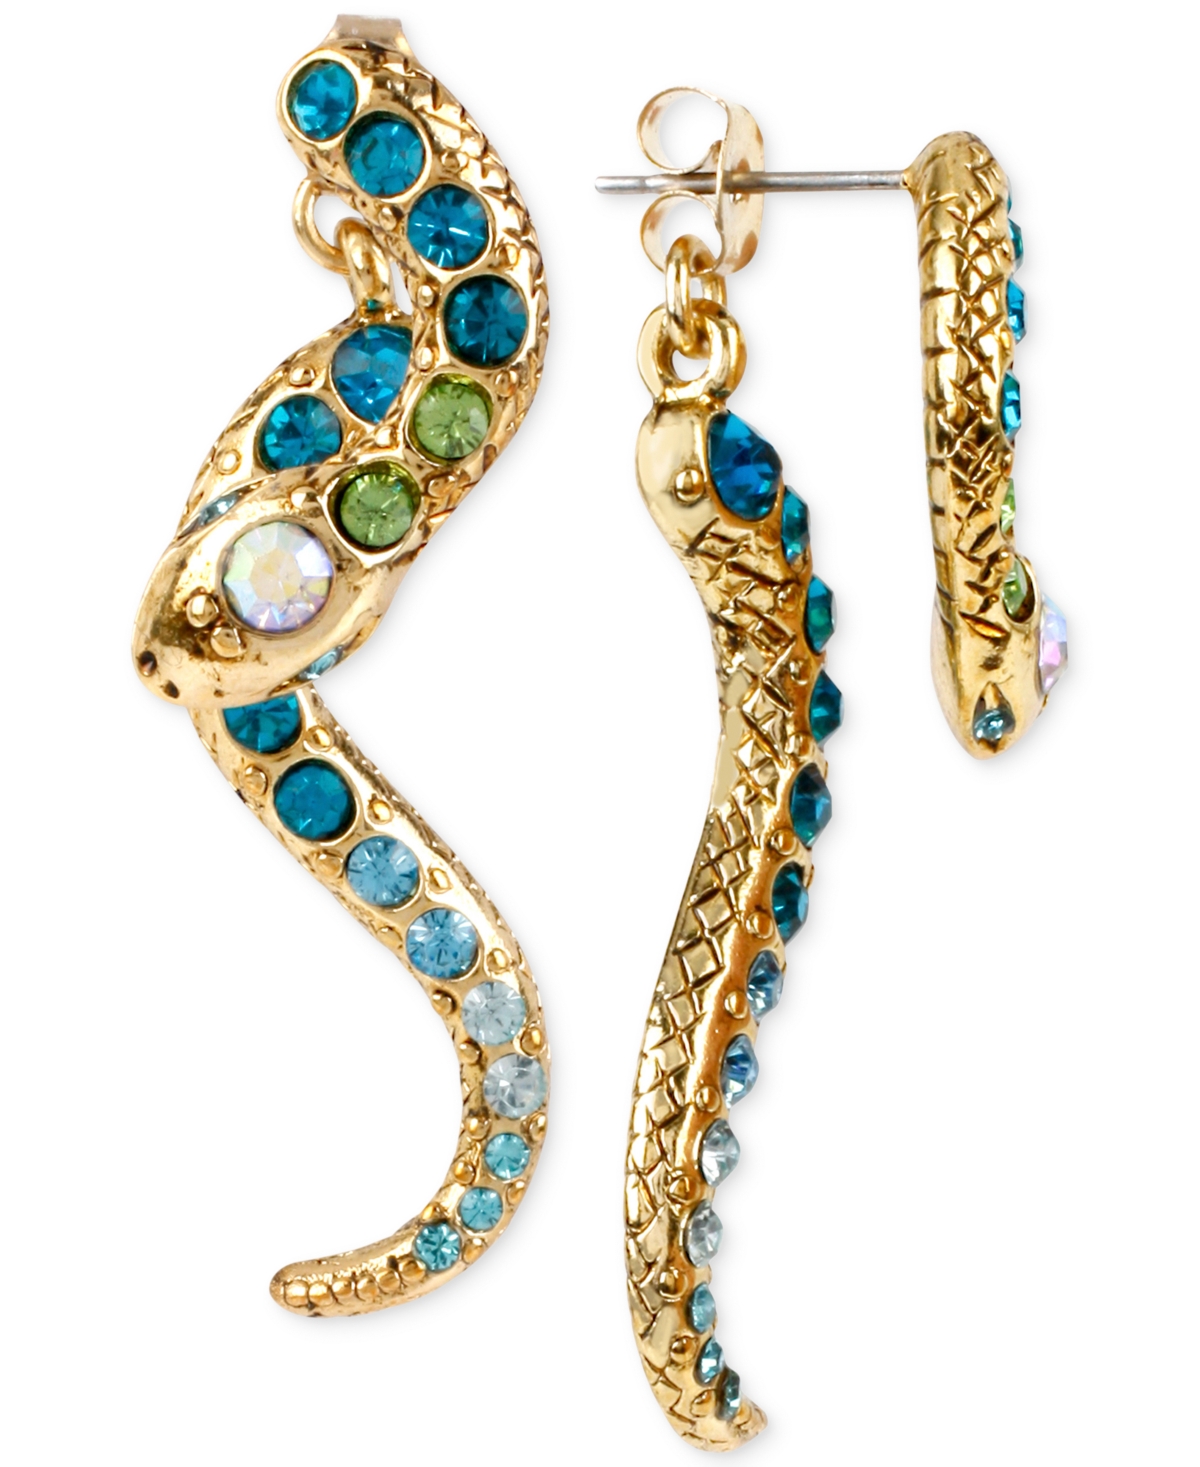 Gold-Tone Pave Crystal Snake Front and Back Earrings - Blue/Green